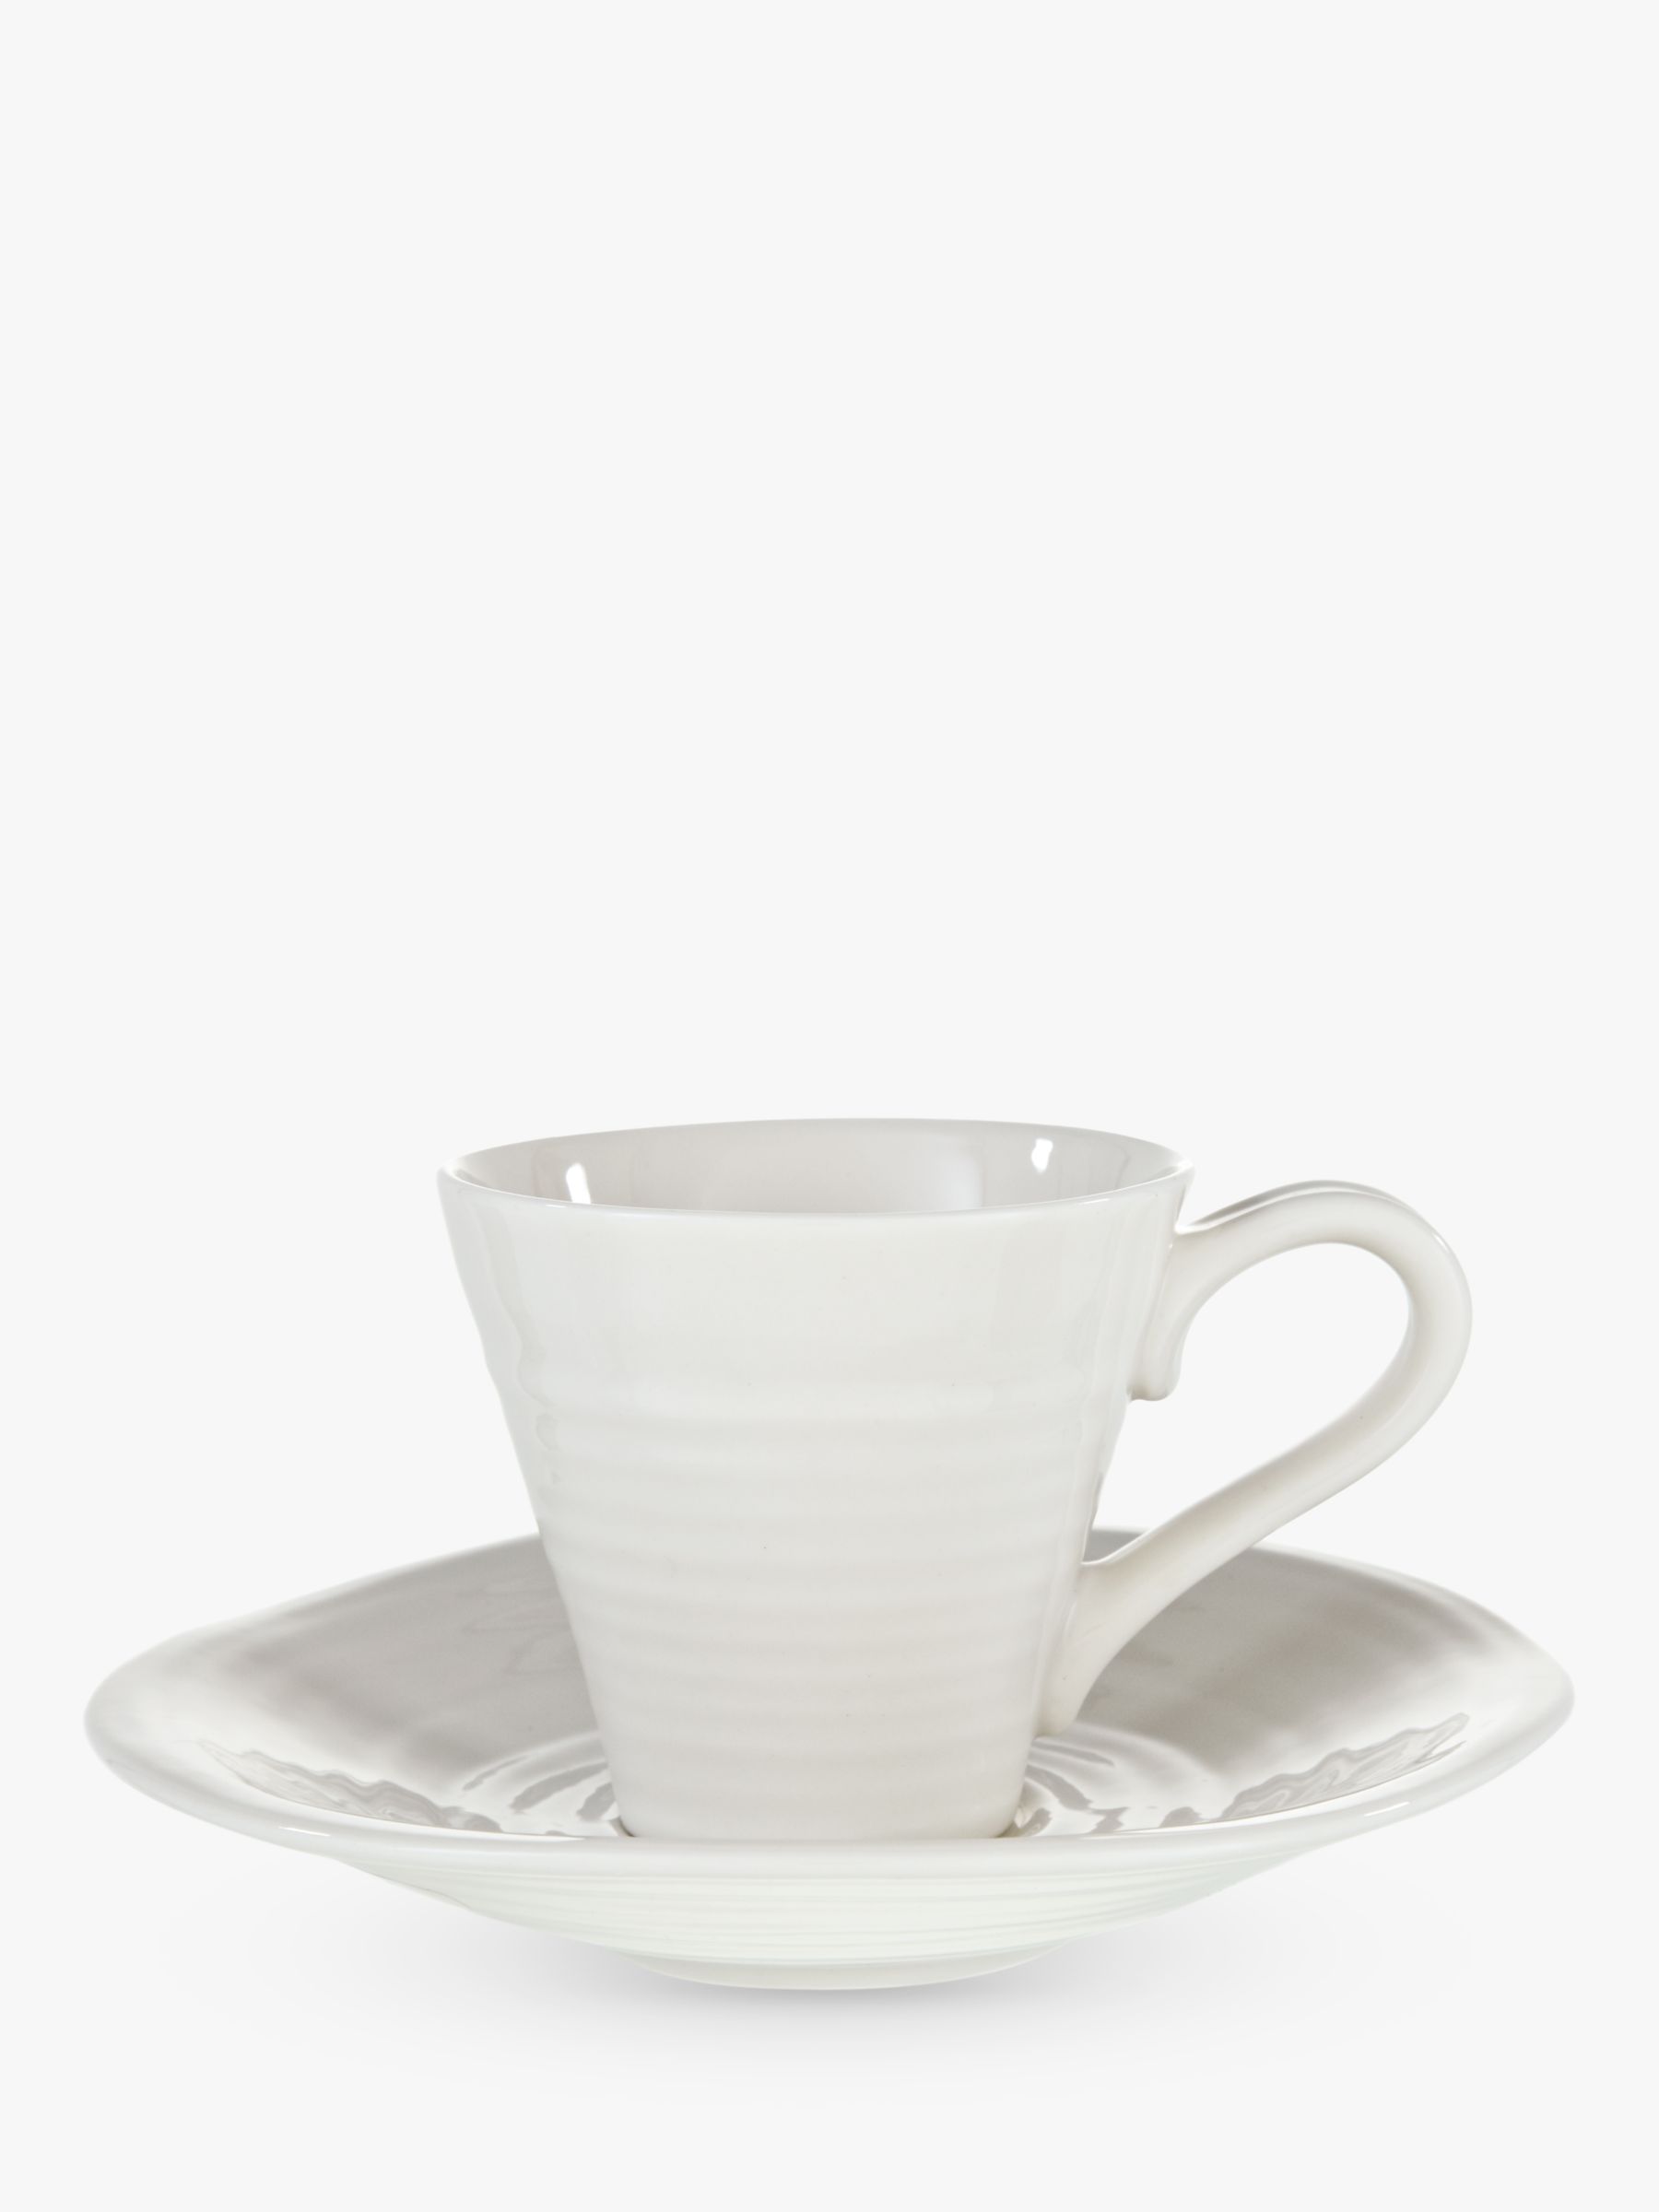 6 x IKEA 365 Espresso cup and saucer  White  6 cl  pack-6 uk-p786 